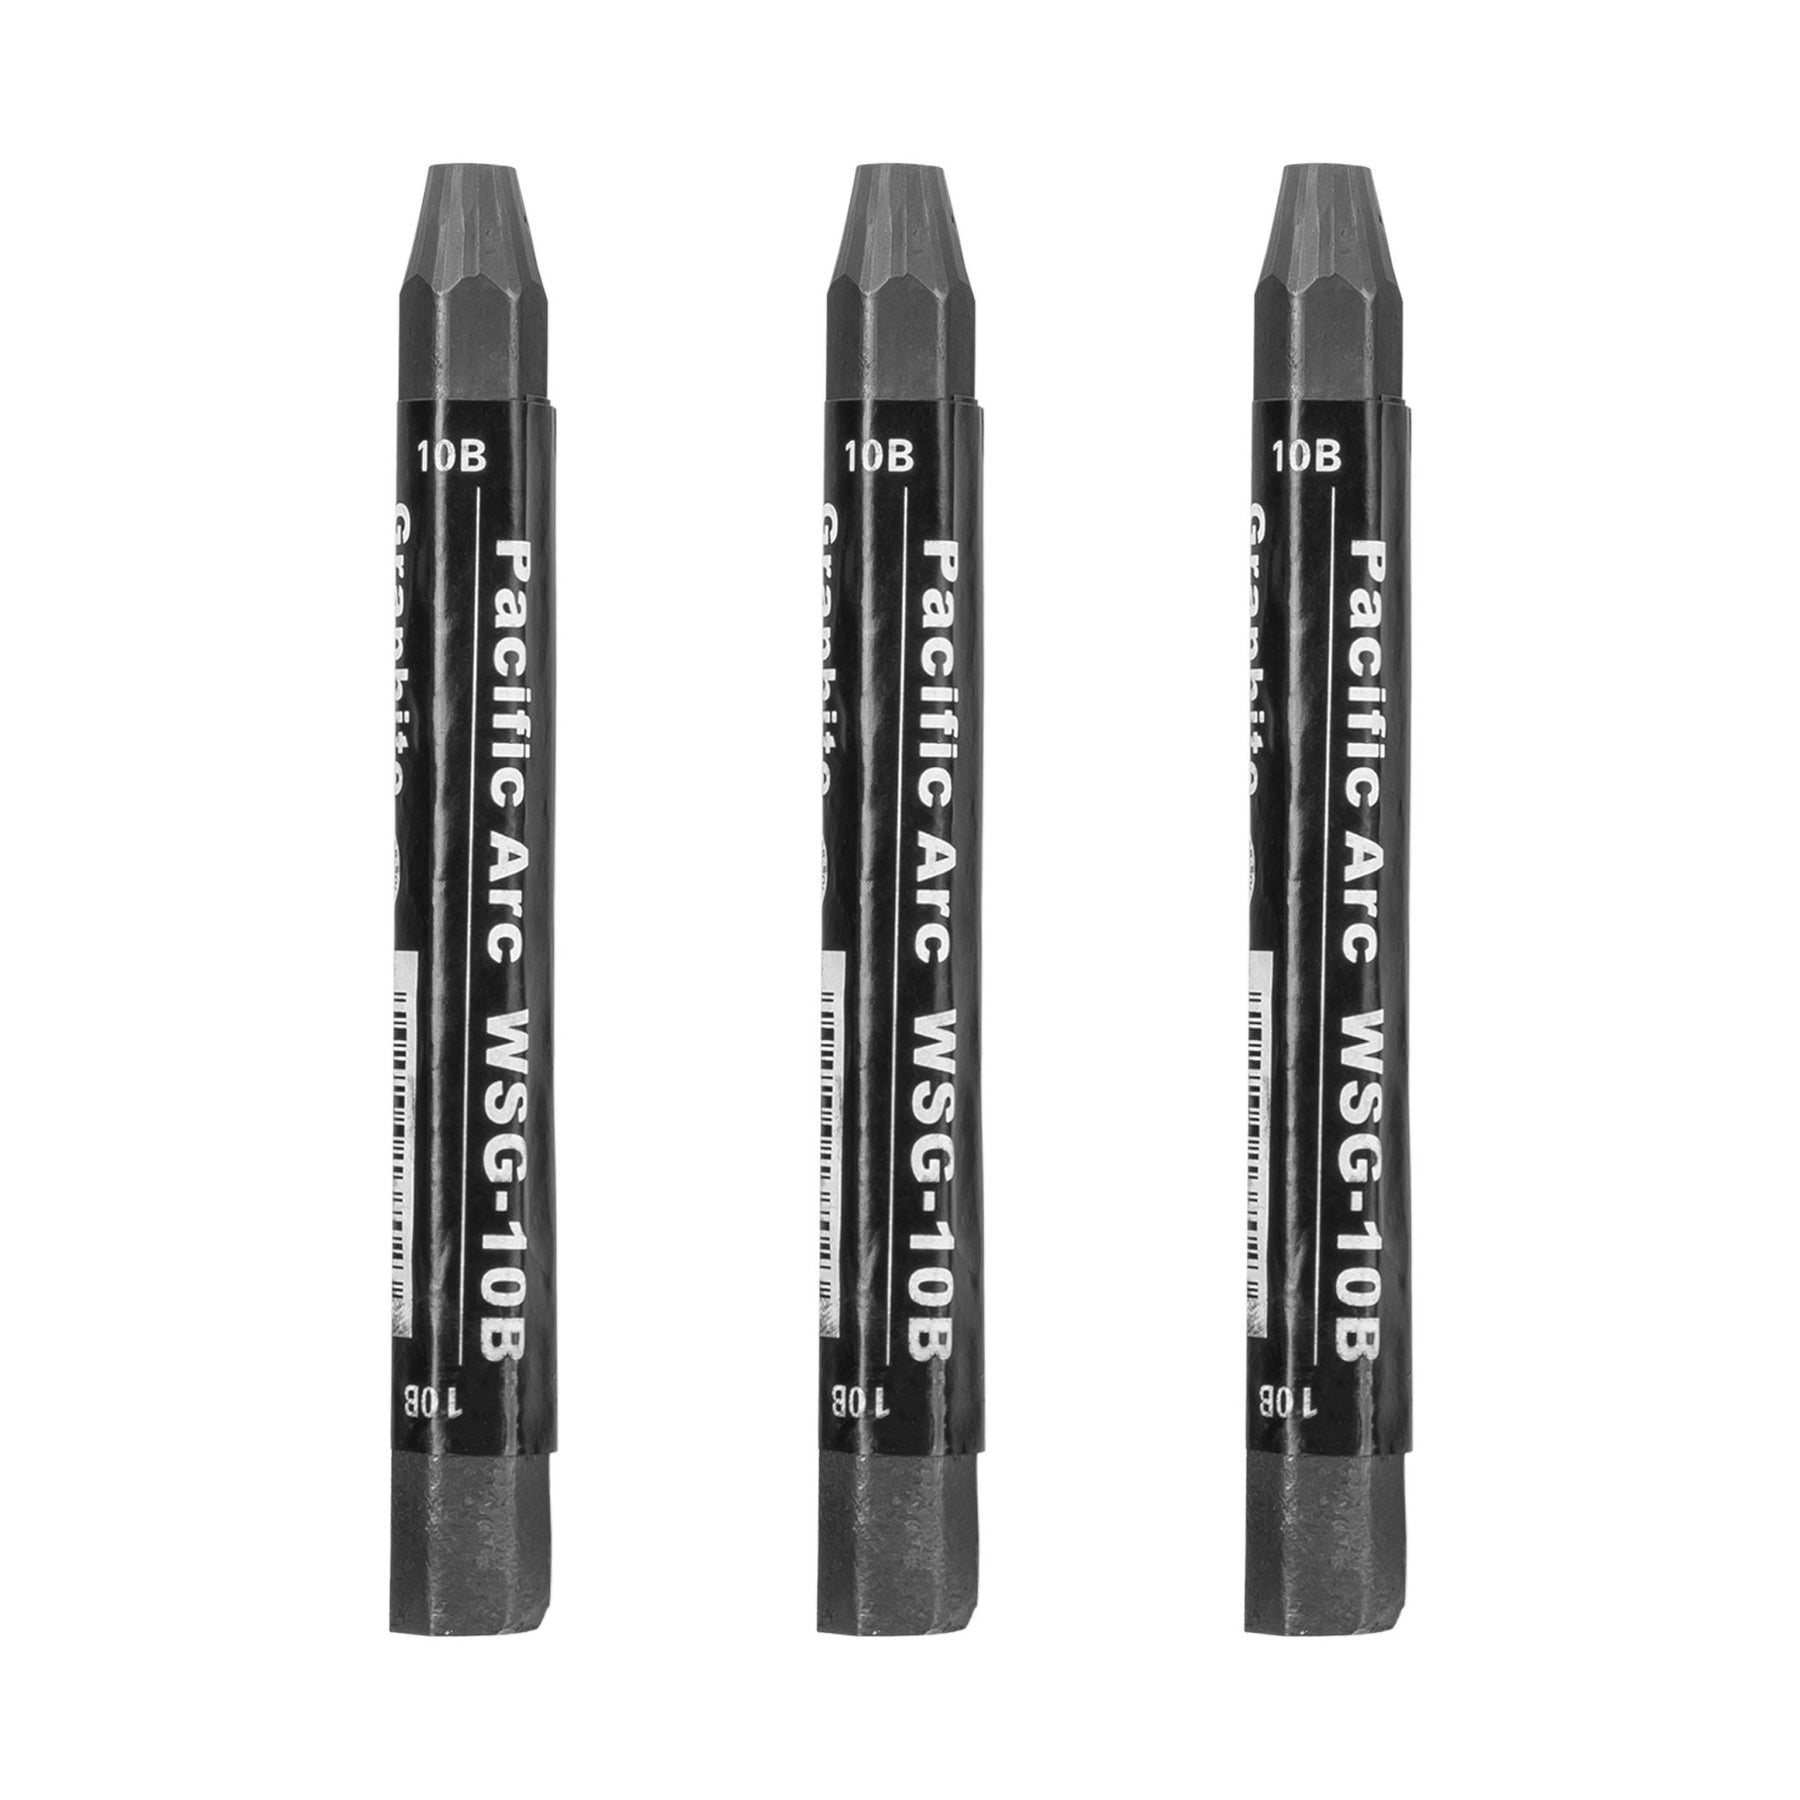  5Pcs Graphite Sticks Water Soluble Safe Environmentally  Friendly Hex Rod Graphite Stick Set Art Drawing Supplies for Sketch Shading  Pencils Artist Sketching : Arts, Crafts & Sewing